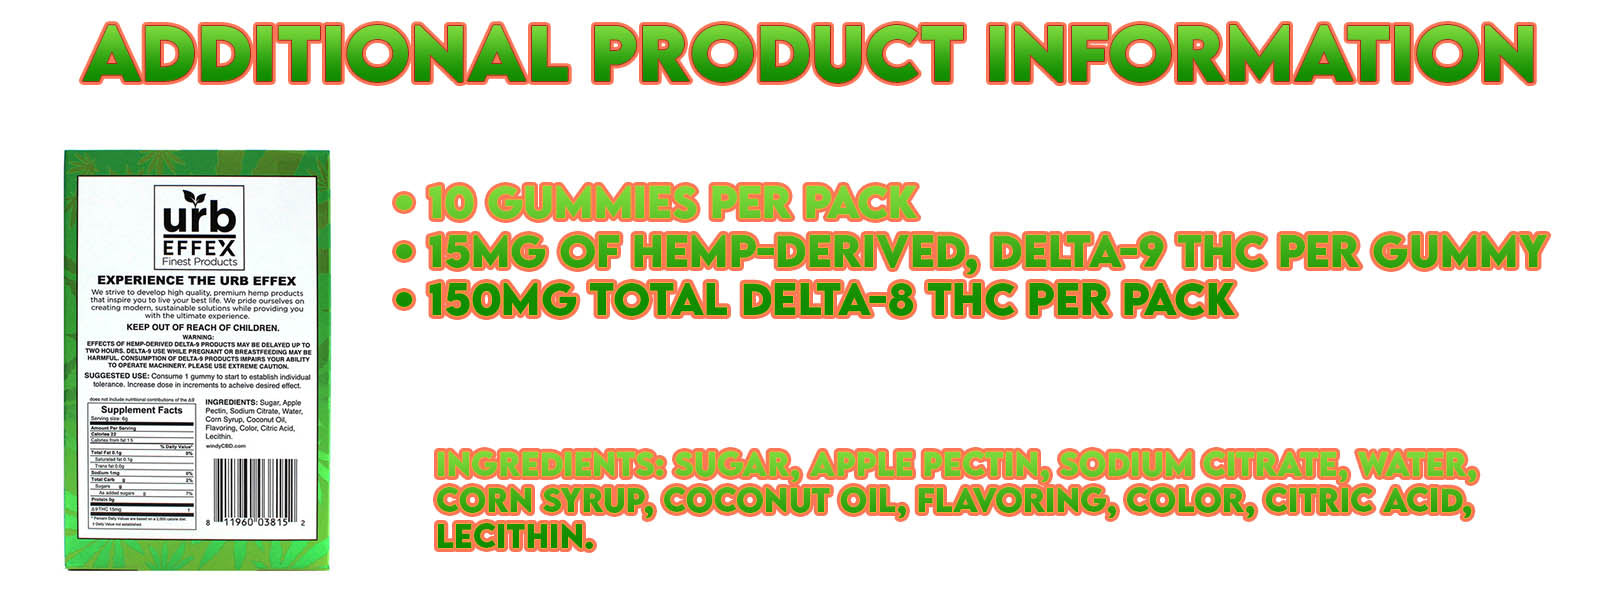 URB Extrax Gummy Product Information